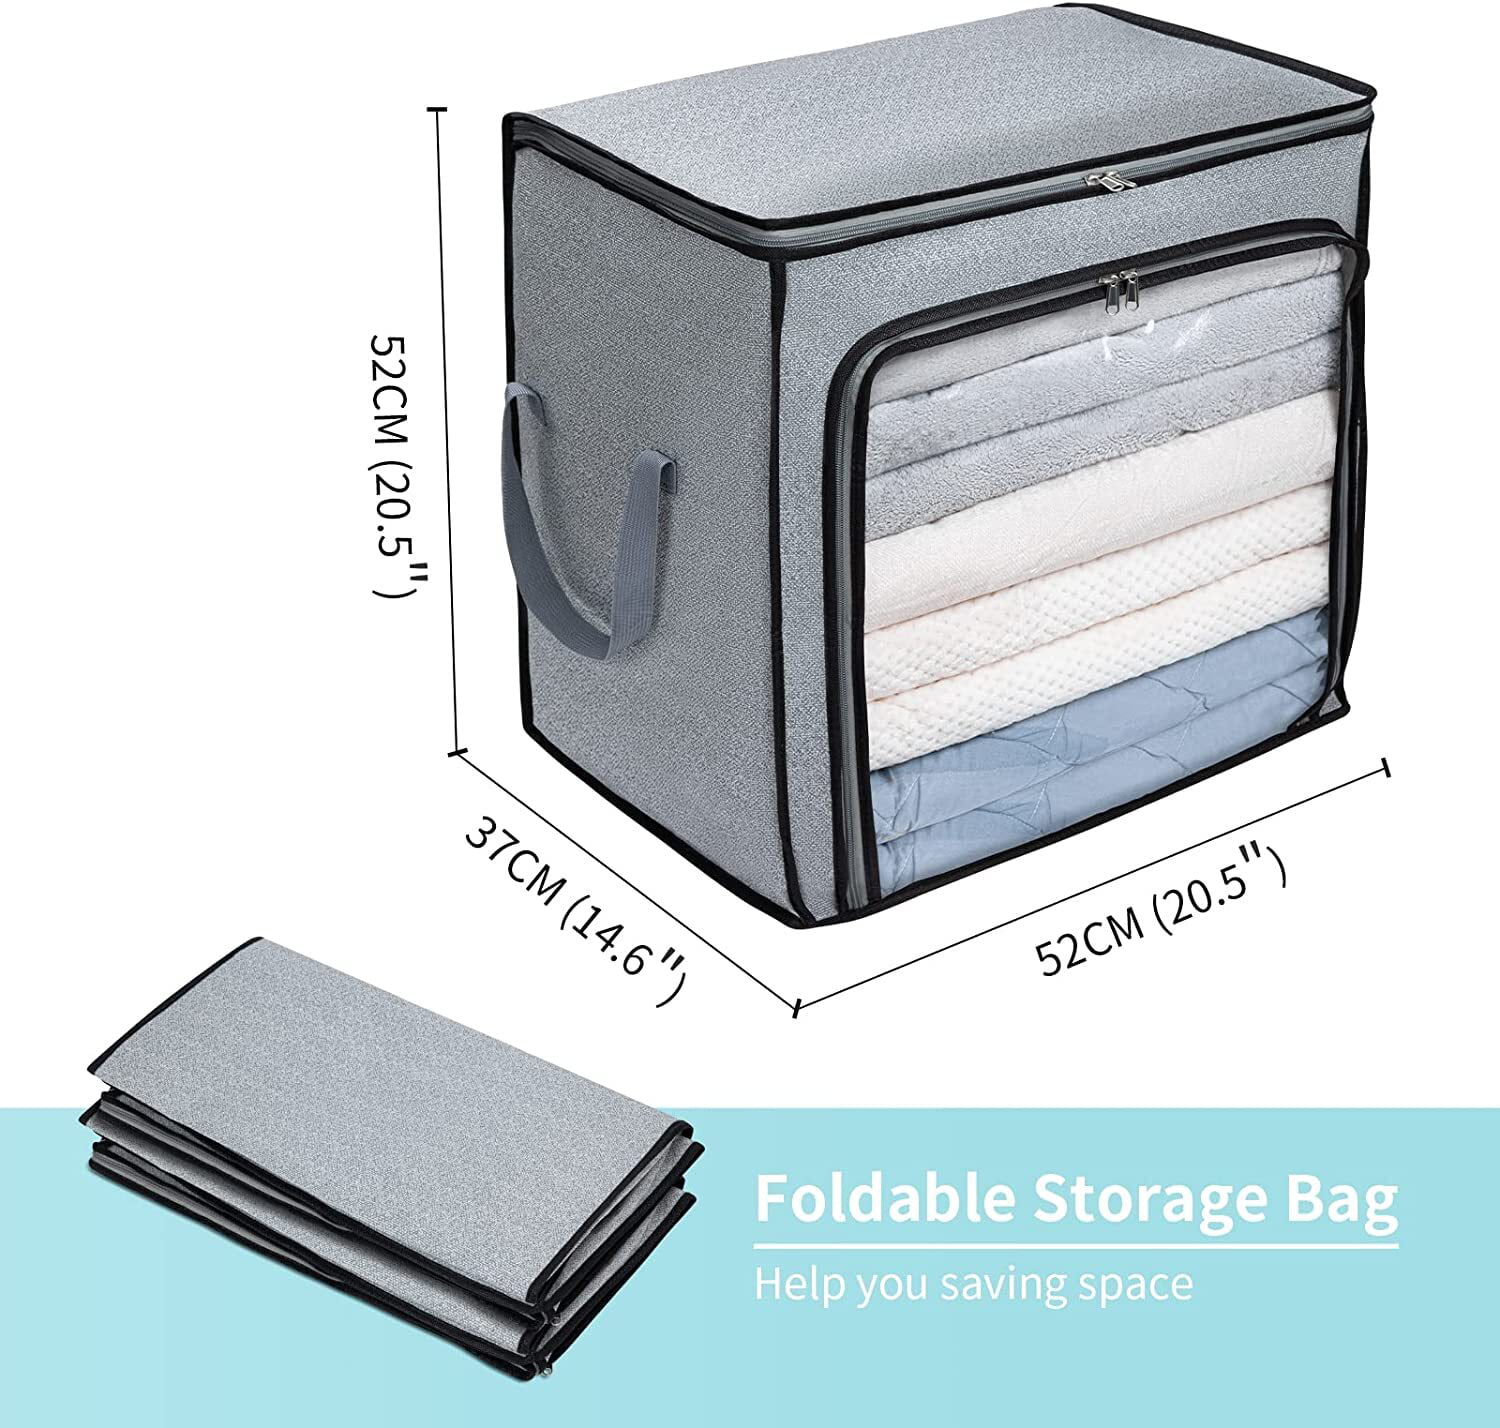 byg 100L Waterproof Clothes Storage Bags,Closet Organizer with Heavy-duty  600D Fabric & Reinforced Handle for